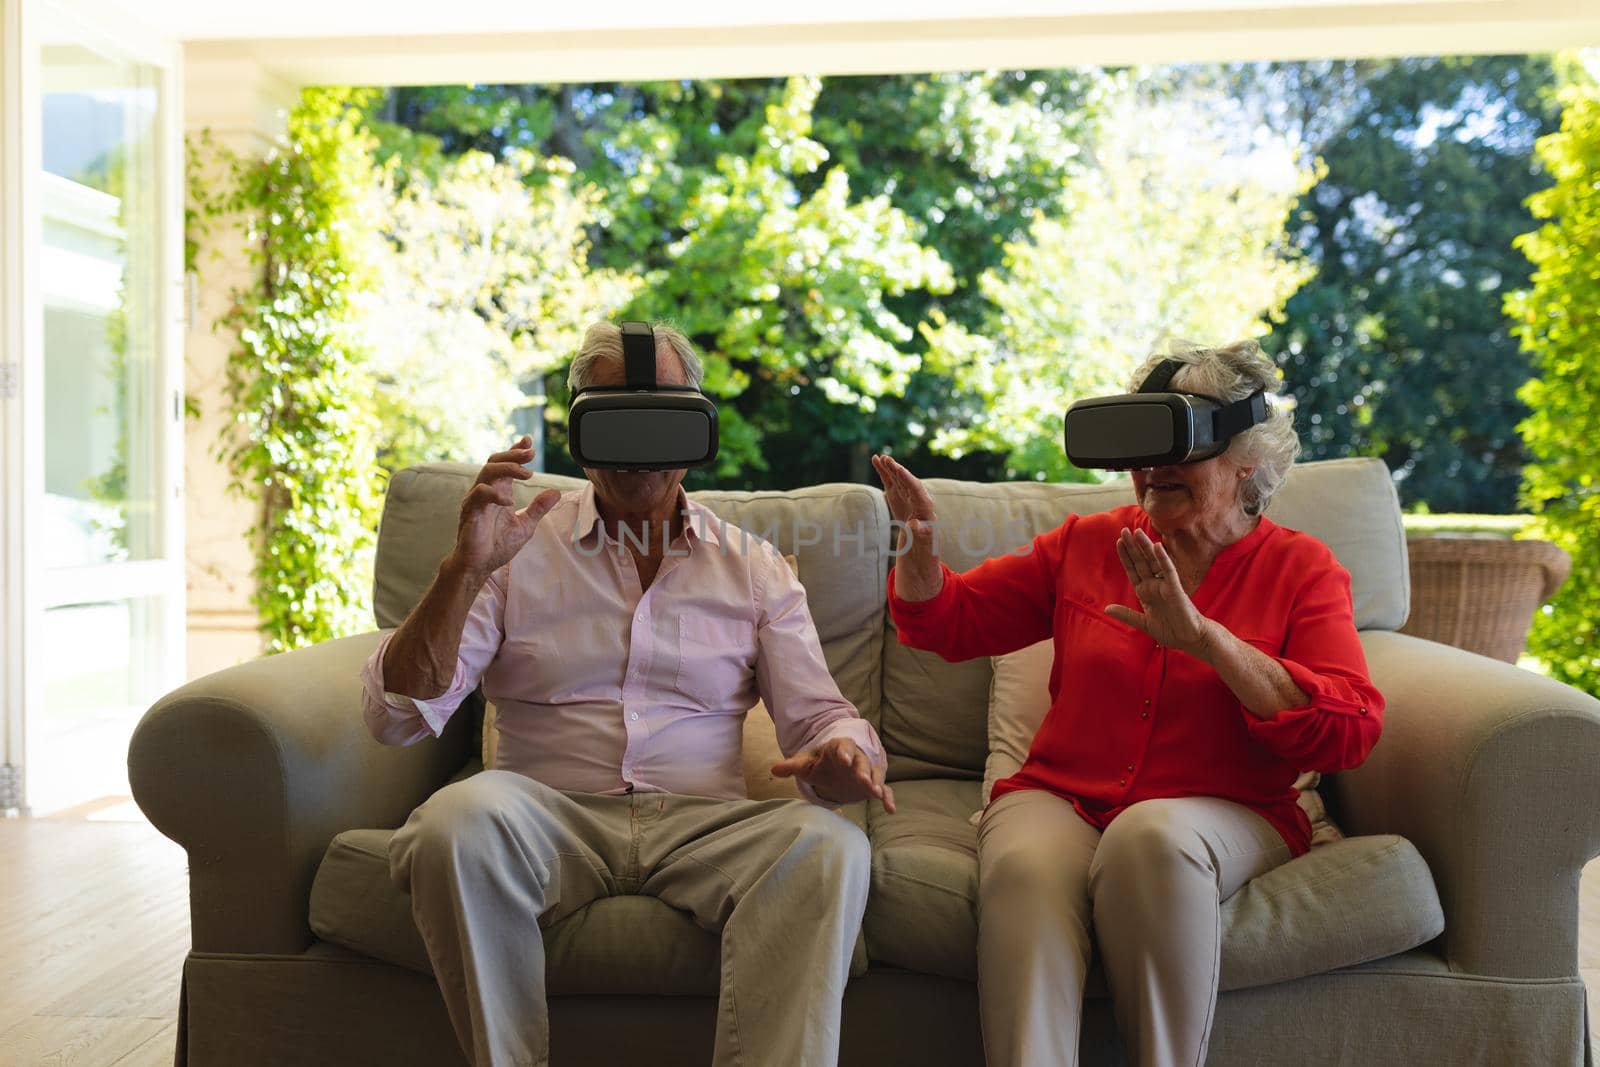 Senior caucasian couple sitting on sofa together wearing vr headset touching virtual screen. retreat, retirement and happy senior lifestyle concept.